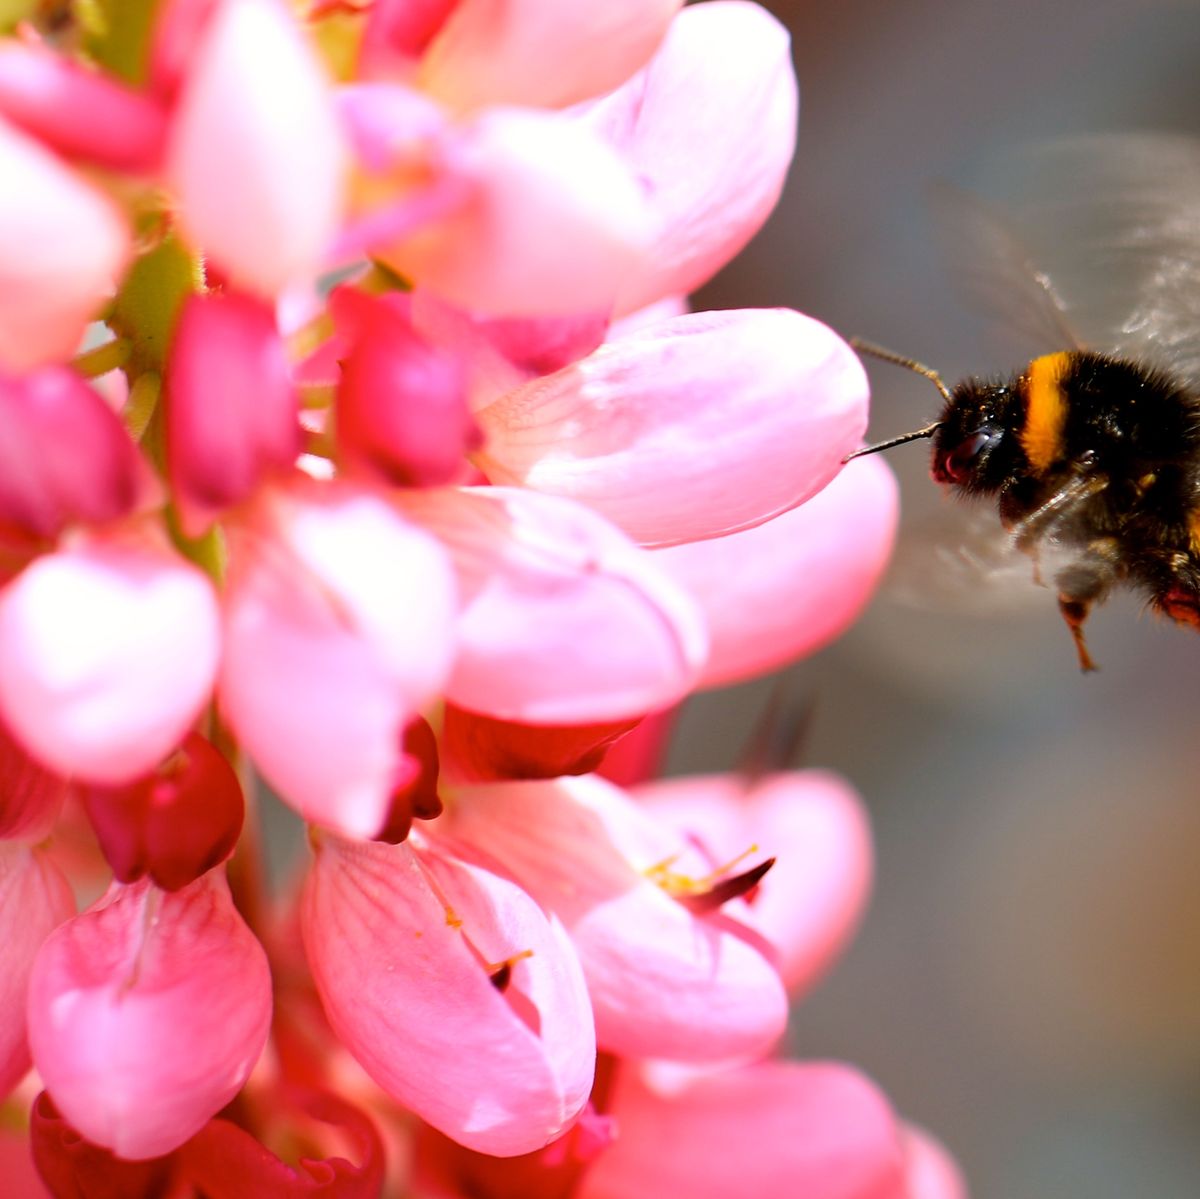 https://hips.hearstapps.com/hmg-prod/images/close-up-of-honey-bumblebee-on-pink-flower-royalty-free-image-692773219-1564078076.jpg?crop=0.621xw:1.00xh;0.294xw,0&resize=1200:*